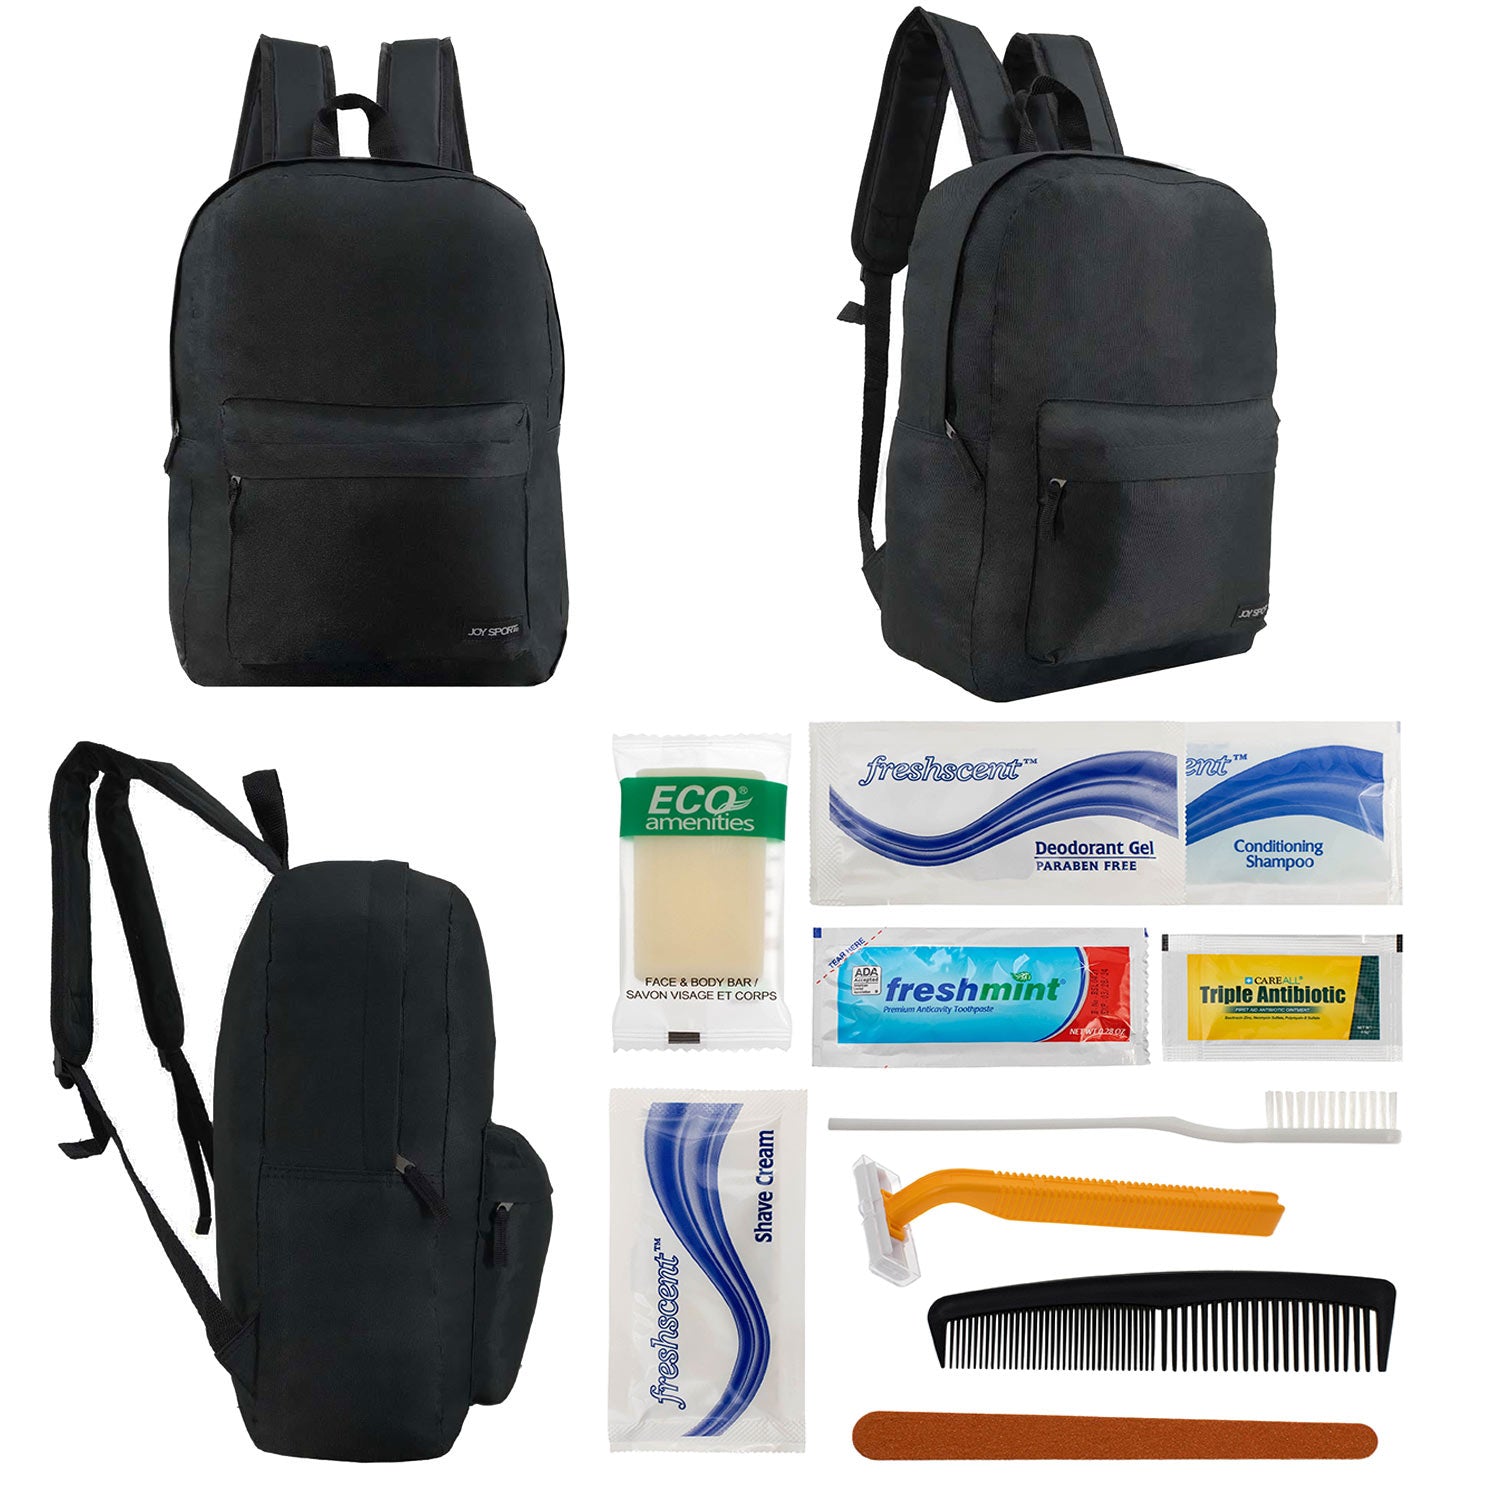 12 Set Wholesale Bundle for Personal Use, Homeless, Charity, and Travel - Bulk Case of 12 Backpacks, 12 Hygiene Kits